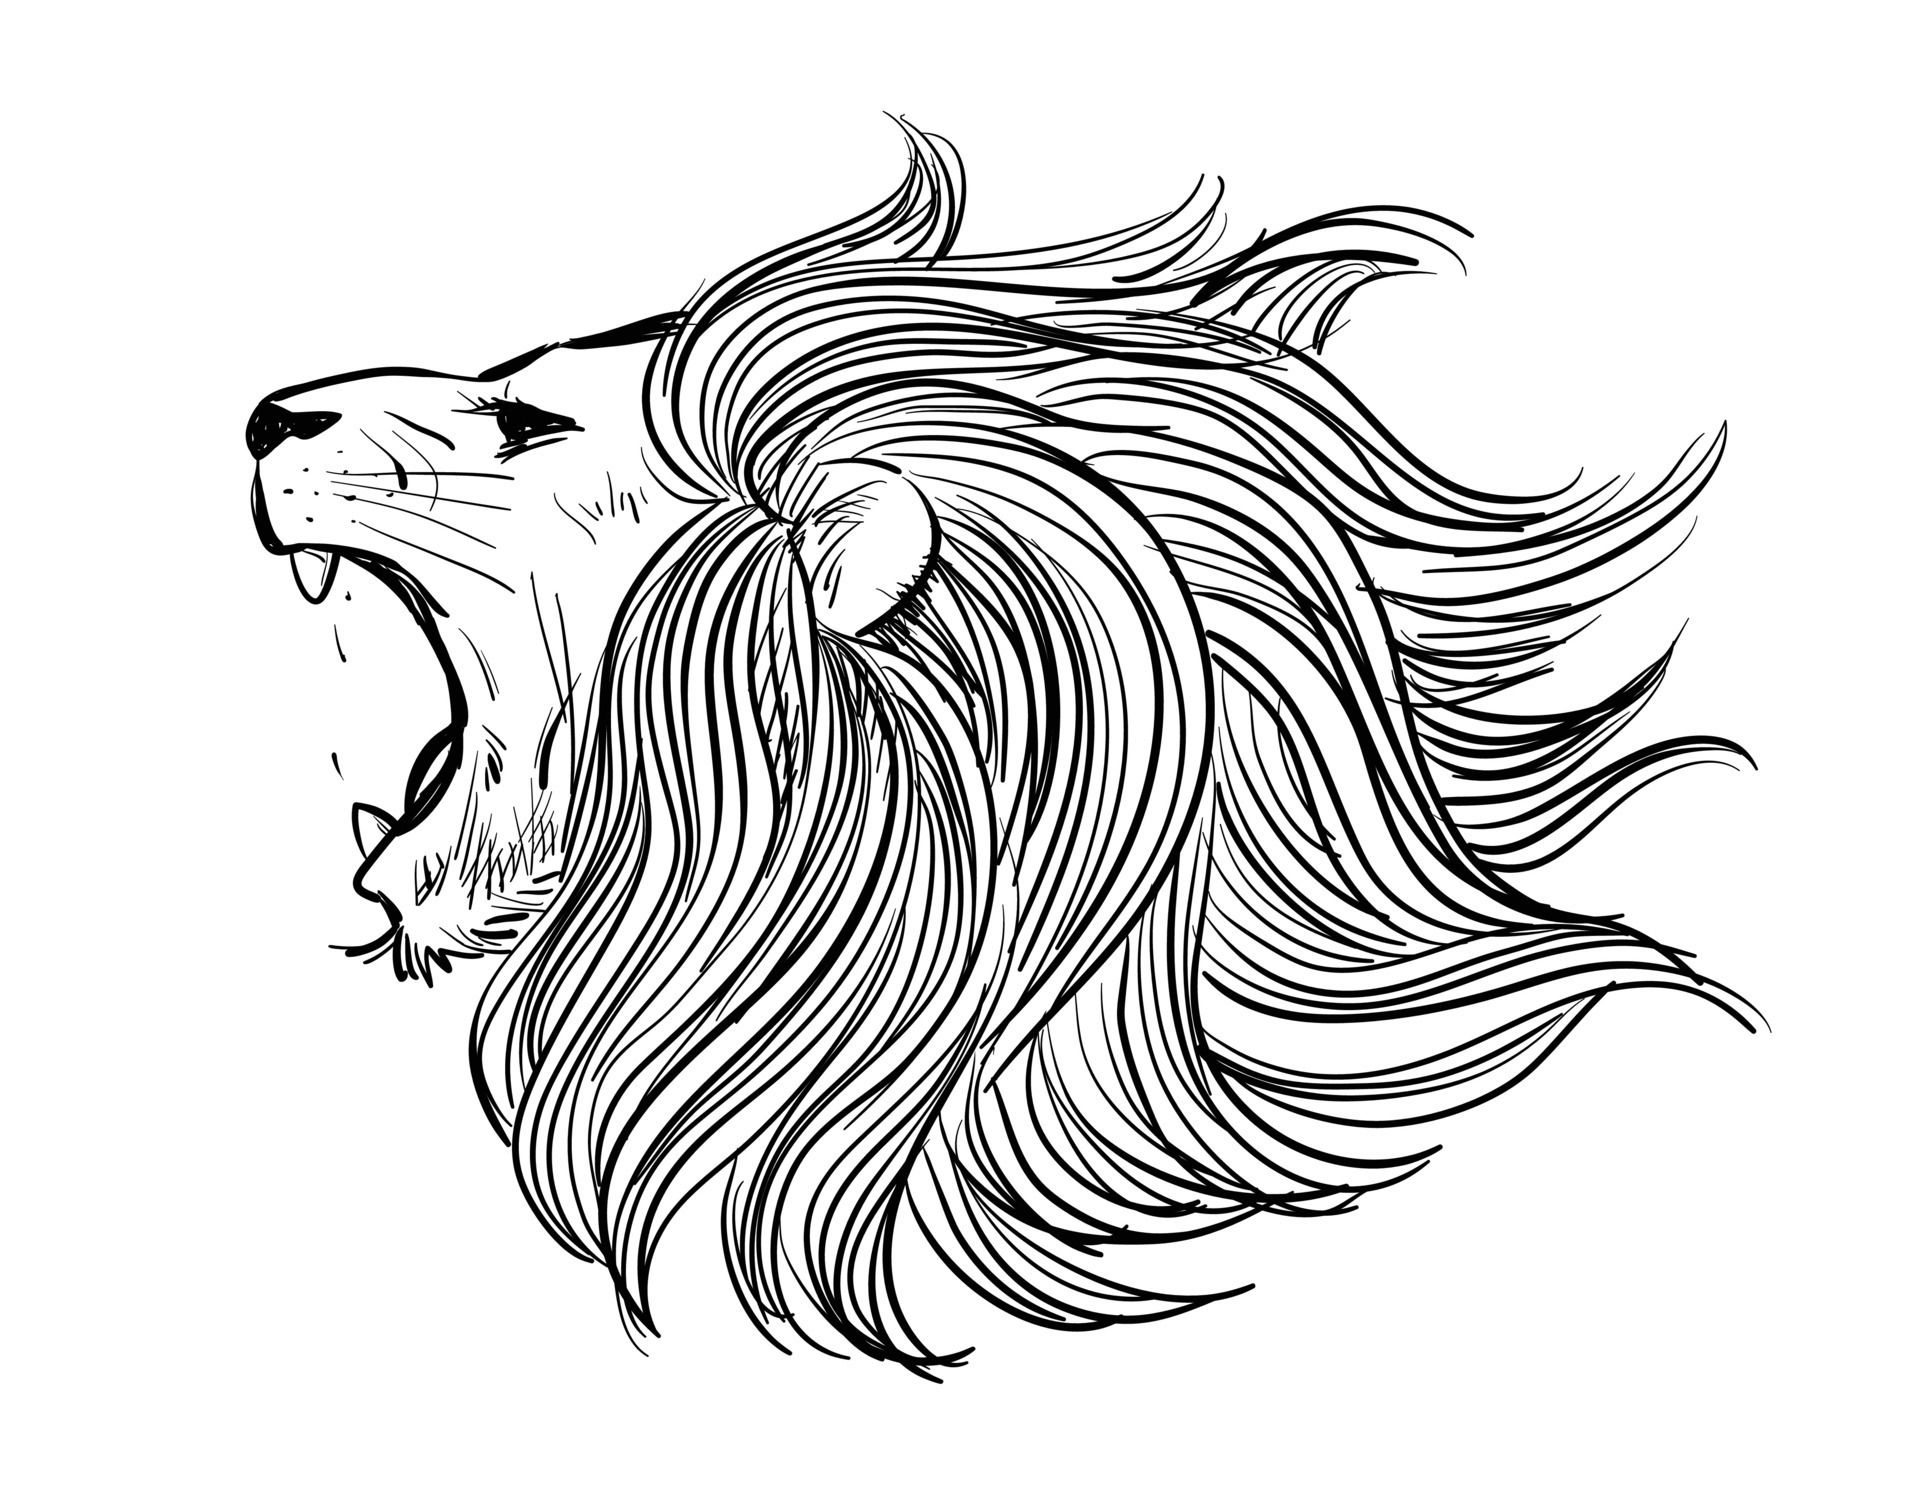 How to Draw a Lion Side View Step by Step | Lion Head Drawing - YouTube-saigonsouth.com.vn